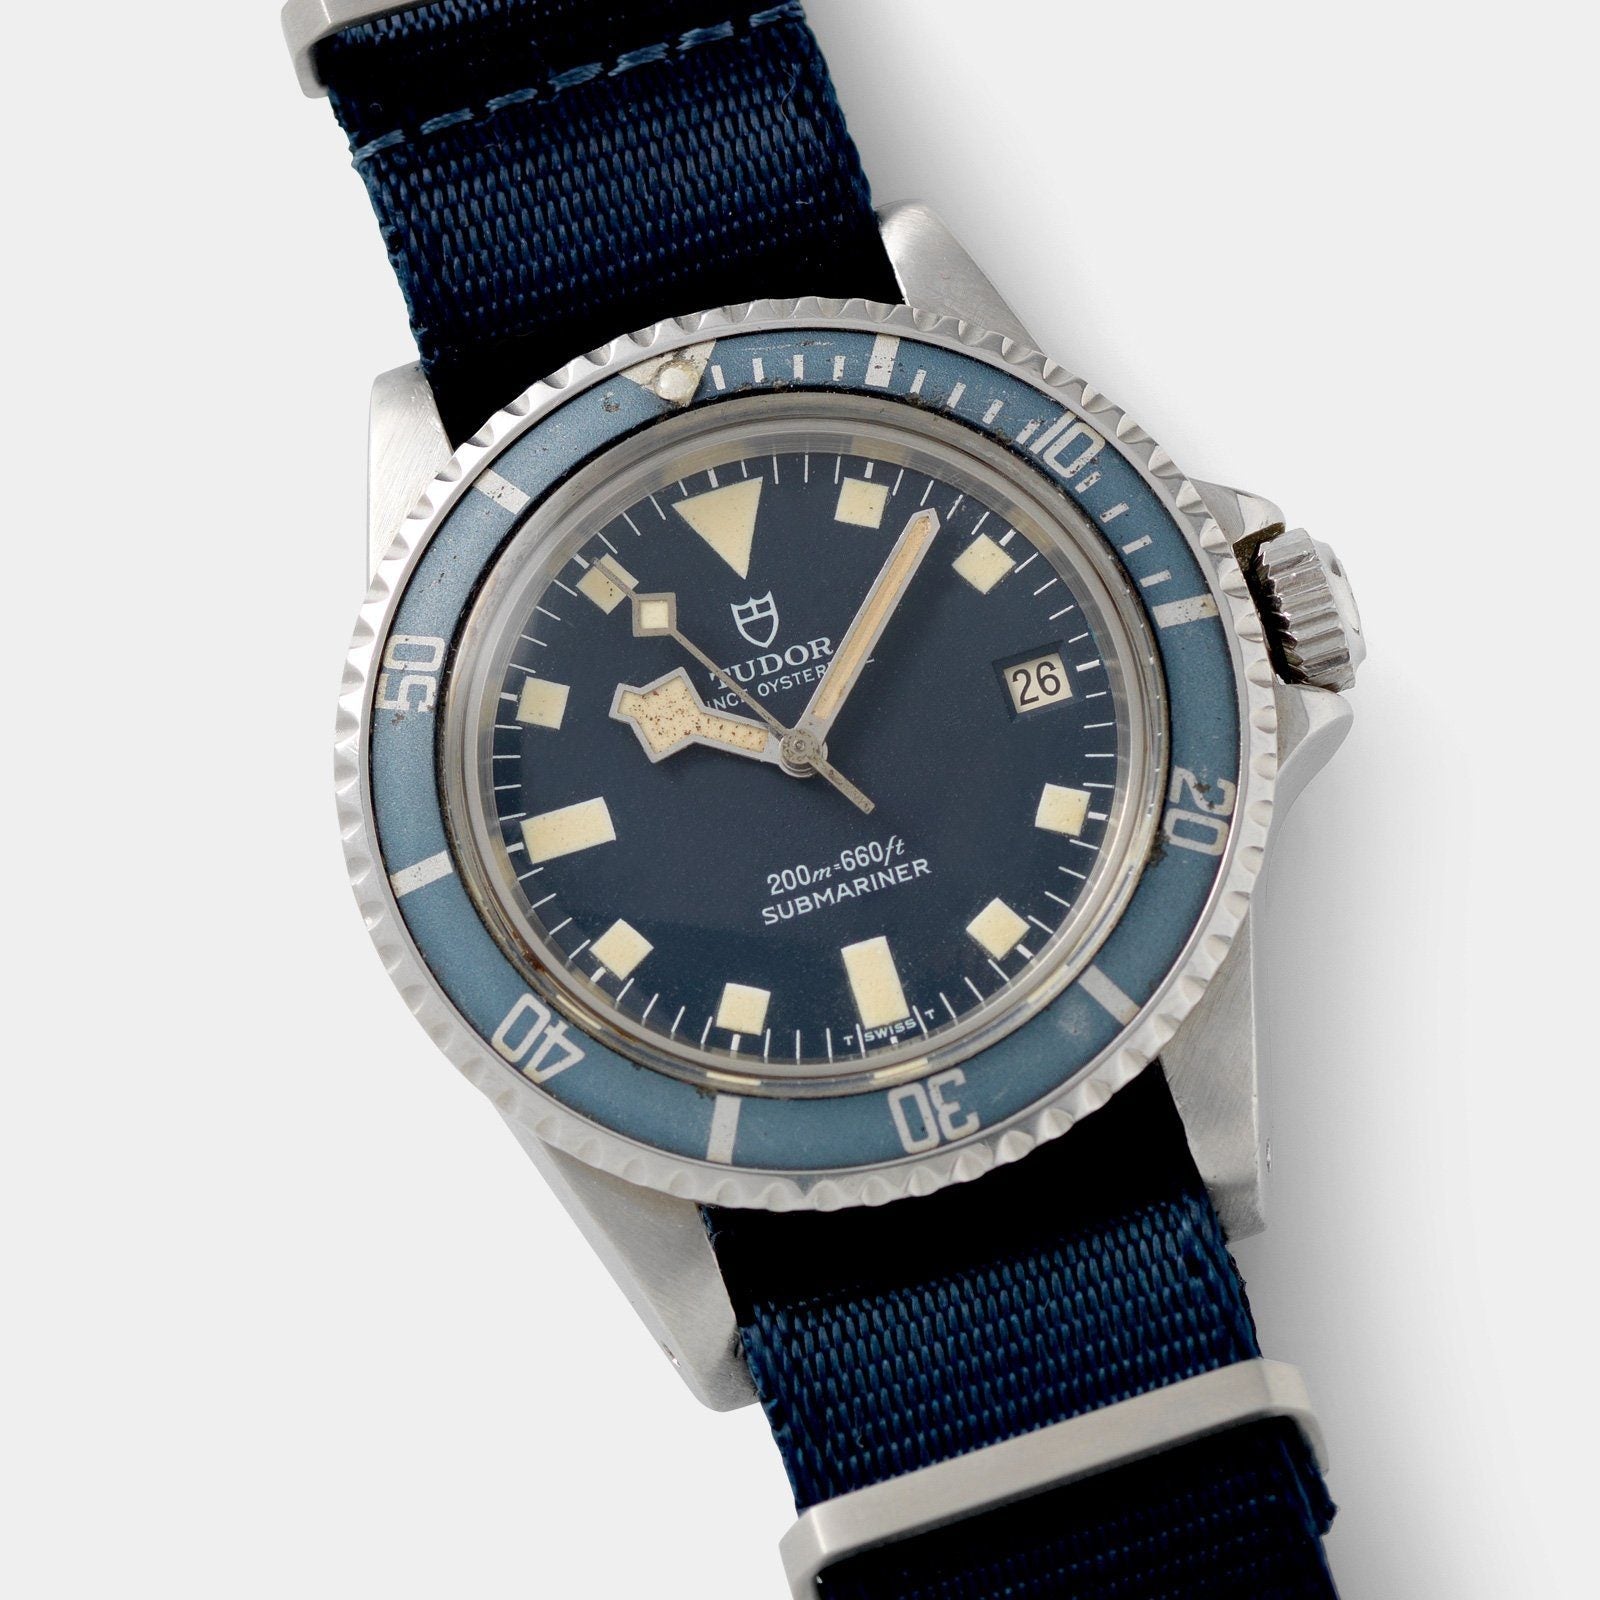 Tudor Jamaican Defence Force Issued Submariner Ref 94110